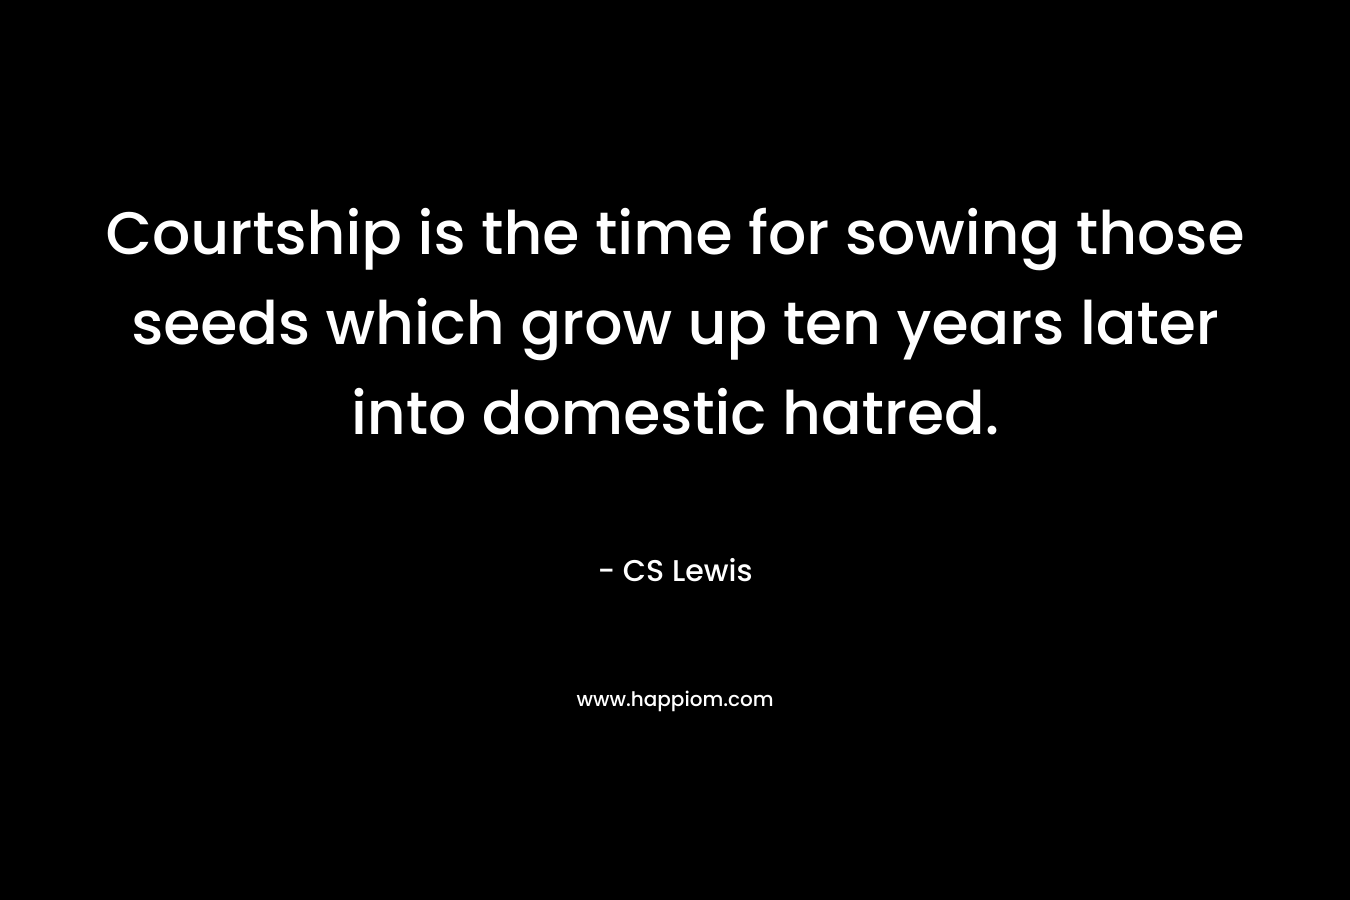 Courtship is the time for sowing those seeds which grow up ten years later into domestic hatred.